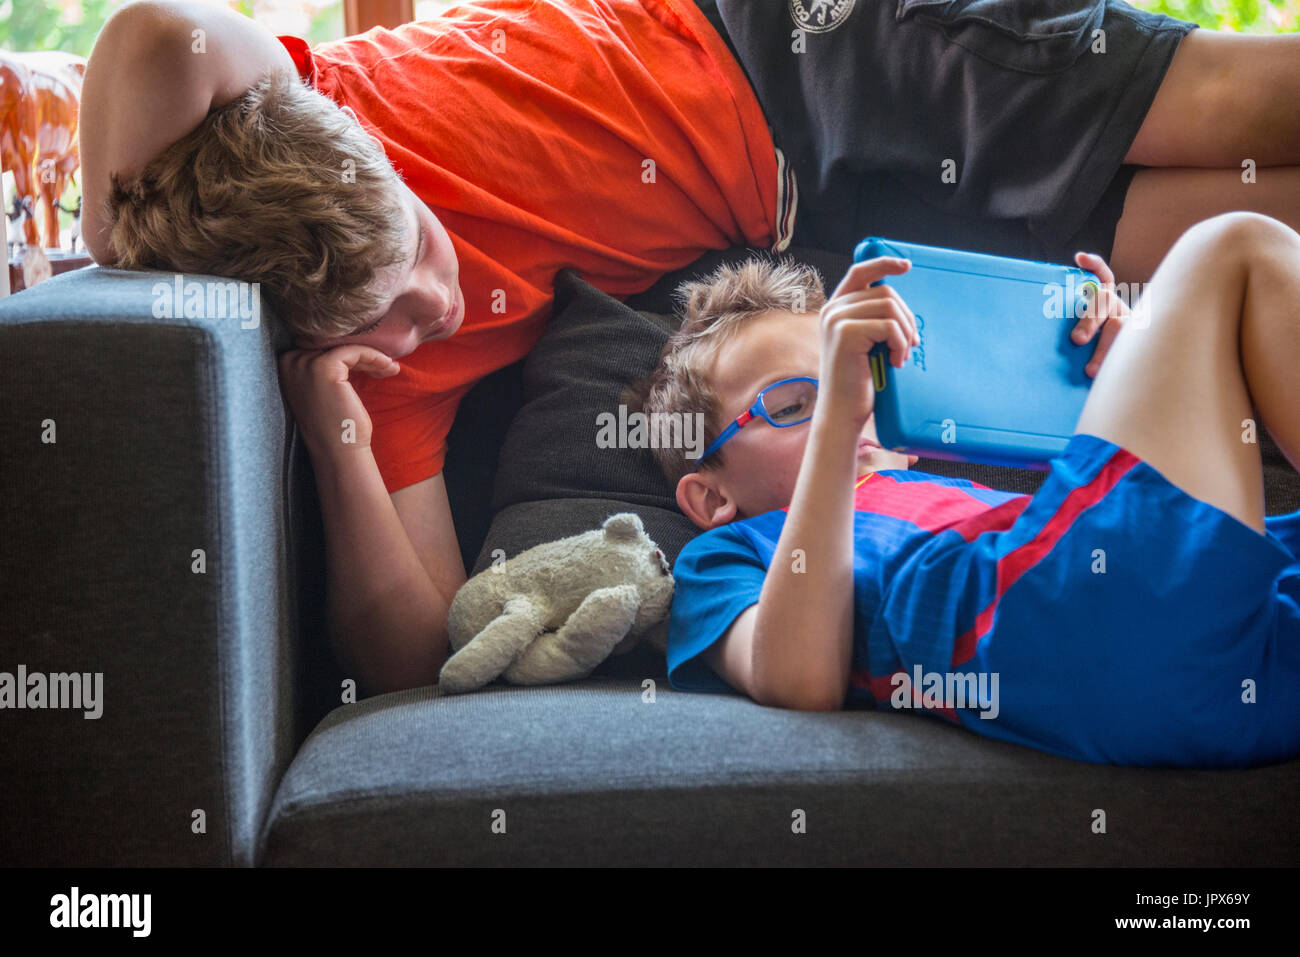 Young Boy playing Computer Game on Tablet with other boy watching Stock Photo